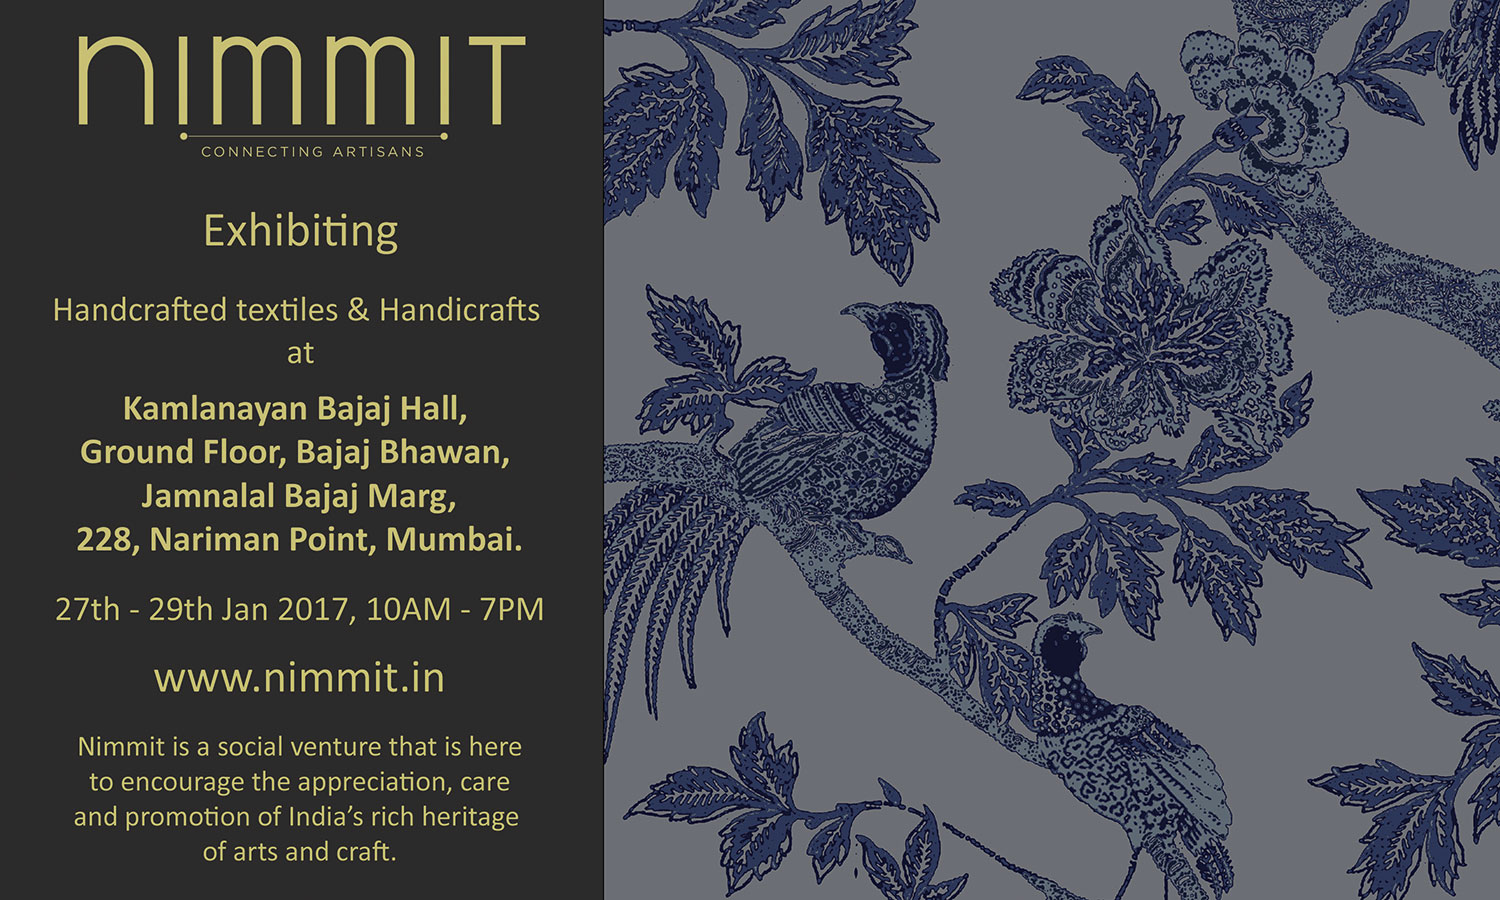 Invitation to the inaugural exhibition of Nimmit at Kamalnayan Bajaj Hall in Nariman Point, Mumbai from 27th-29th January, 2017.